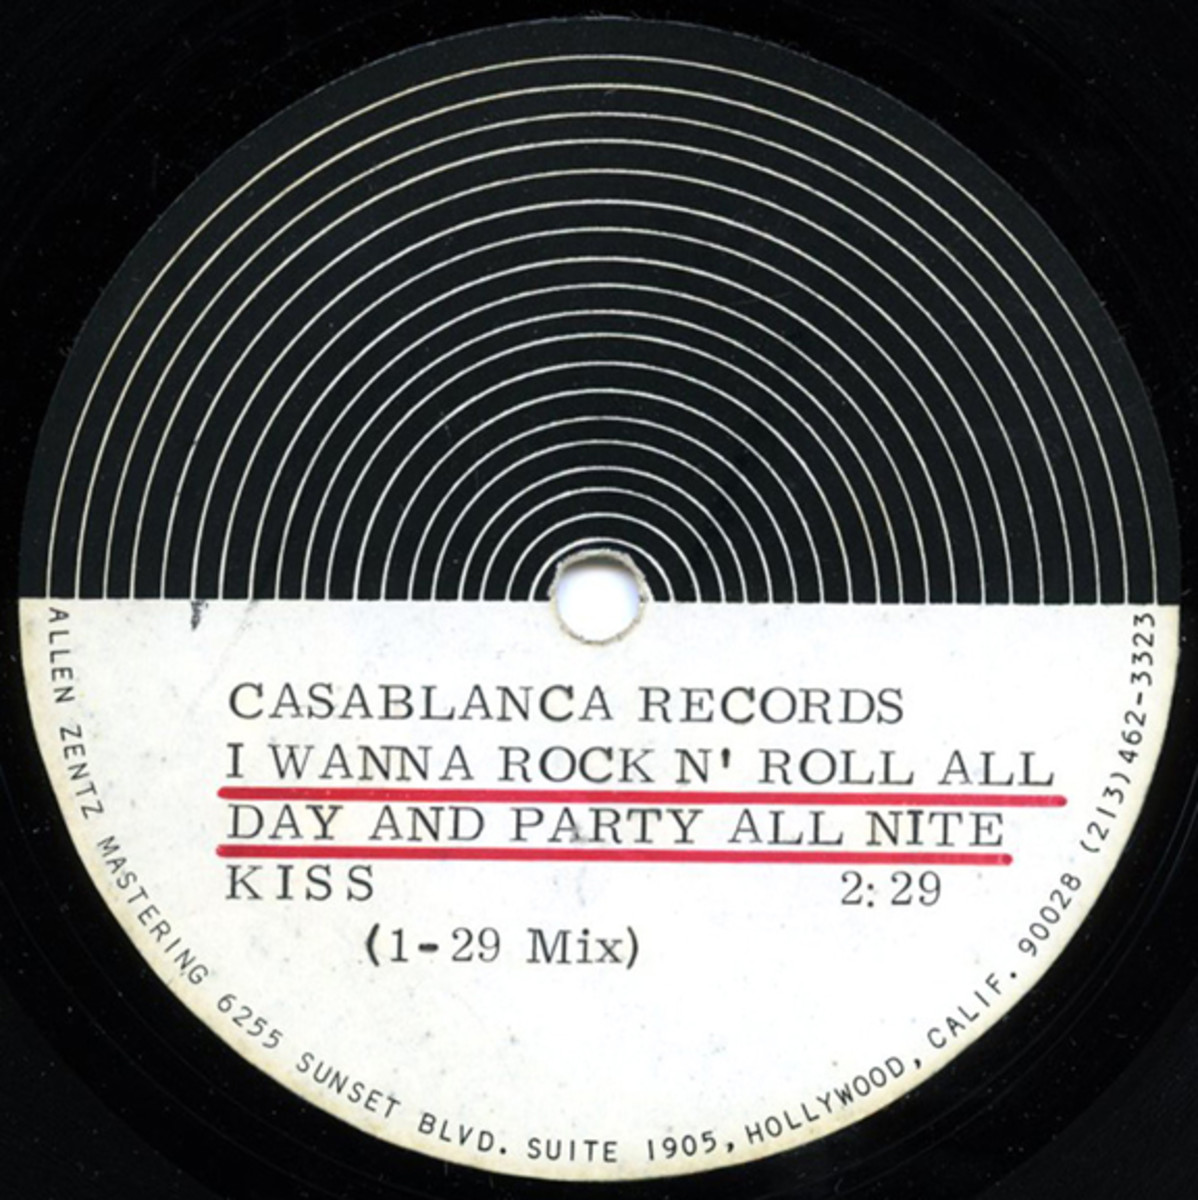 KISS Rock and Roll acetate